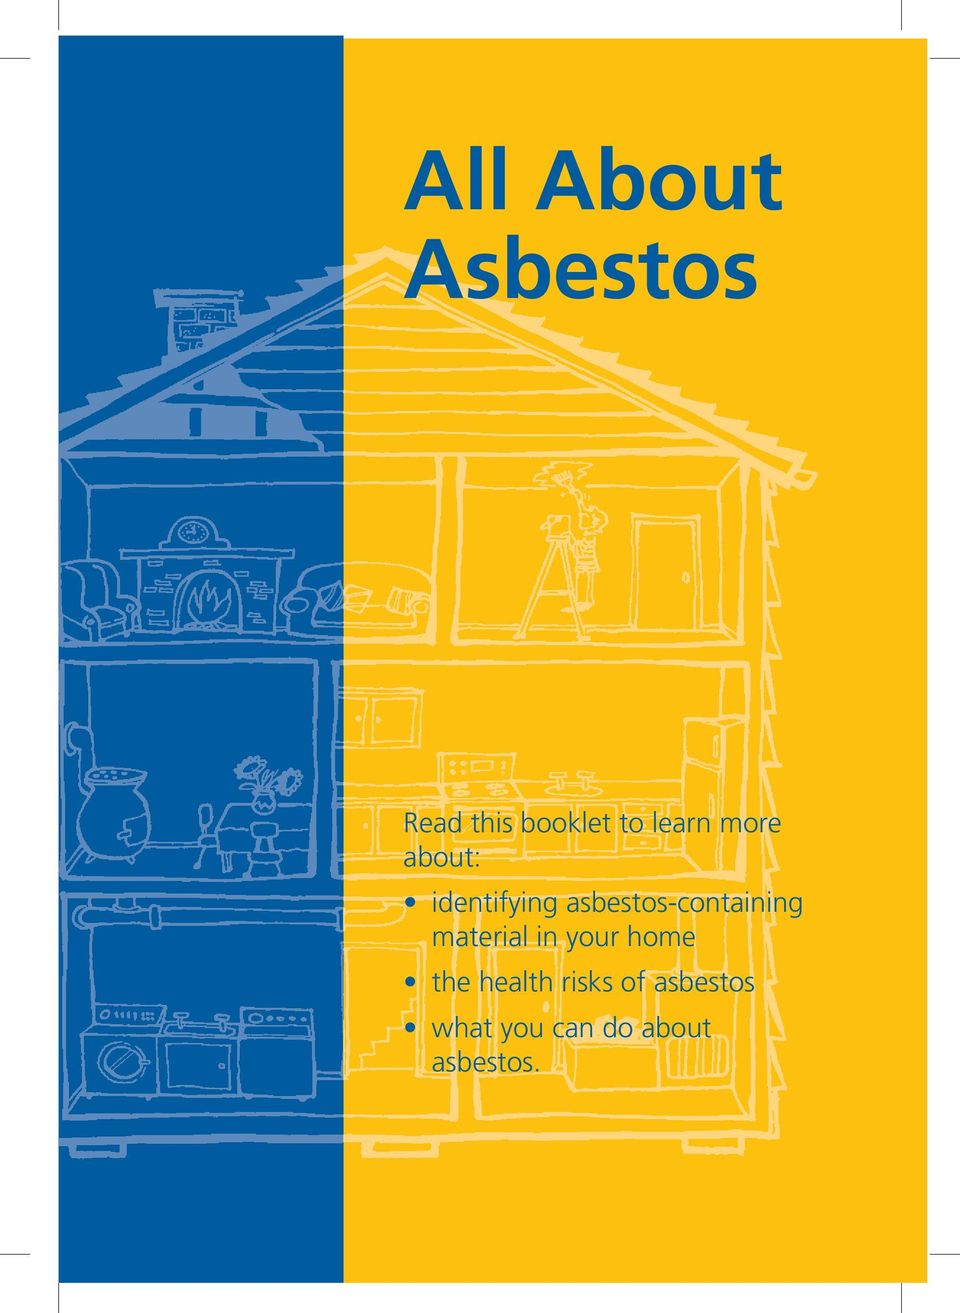 asbestos-containing material in your home